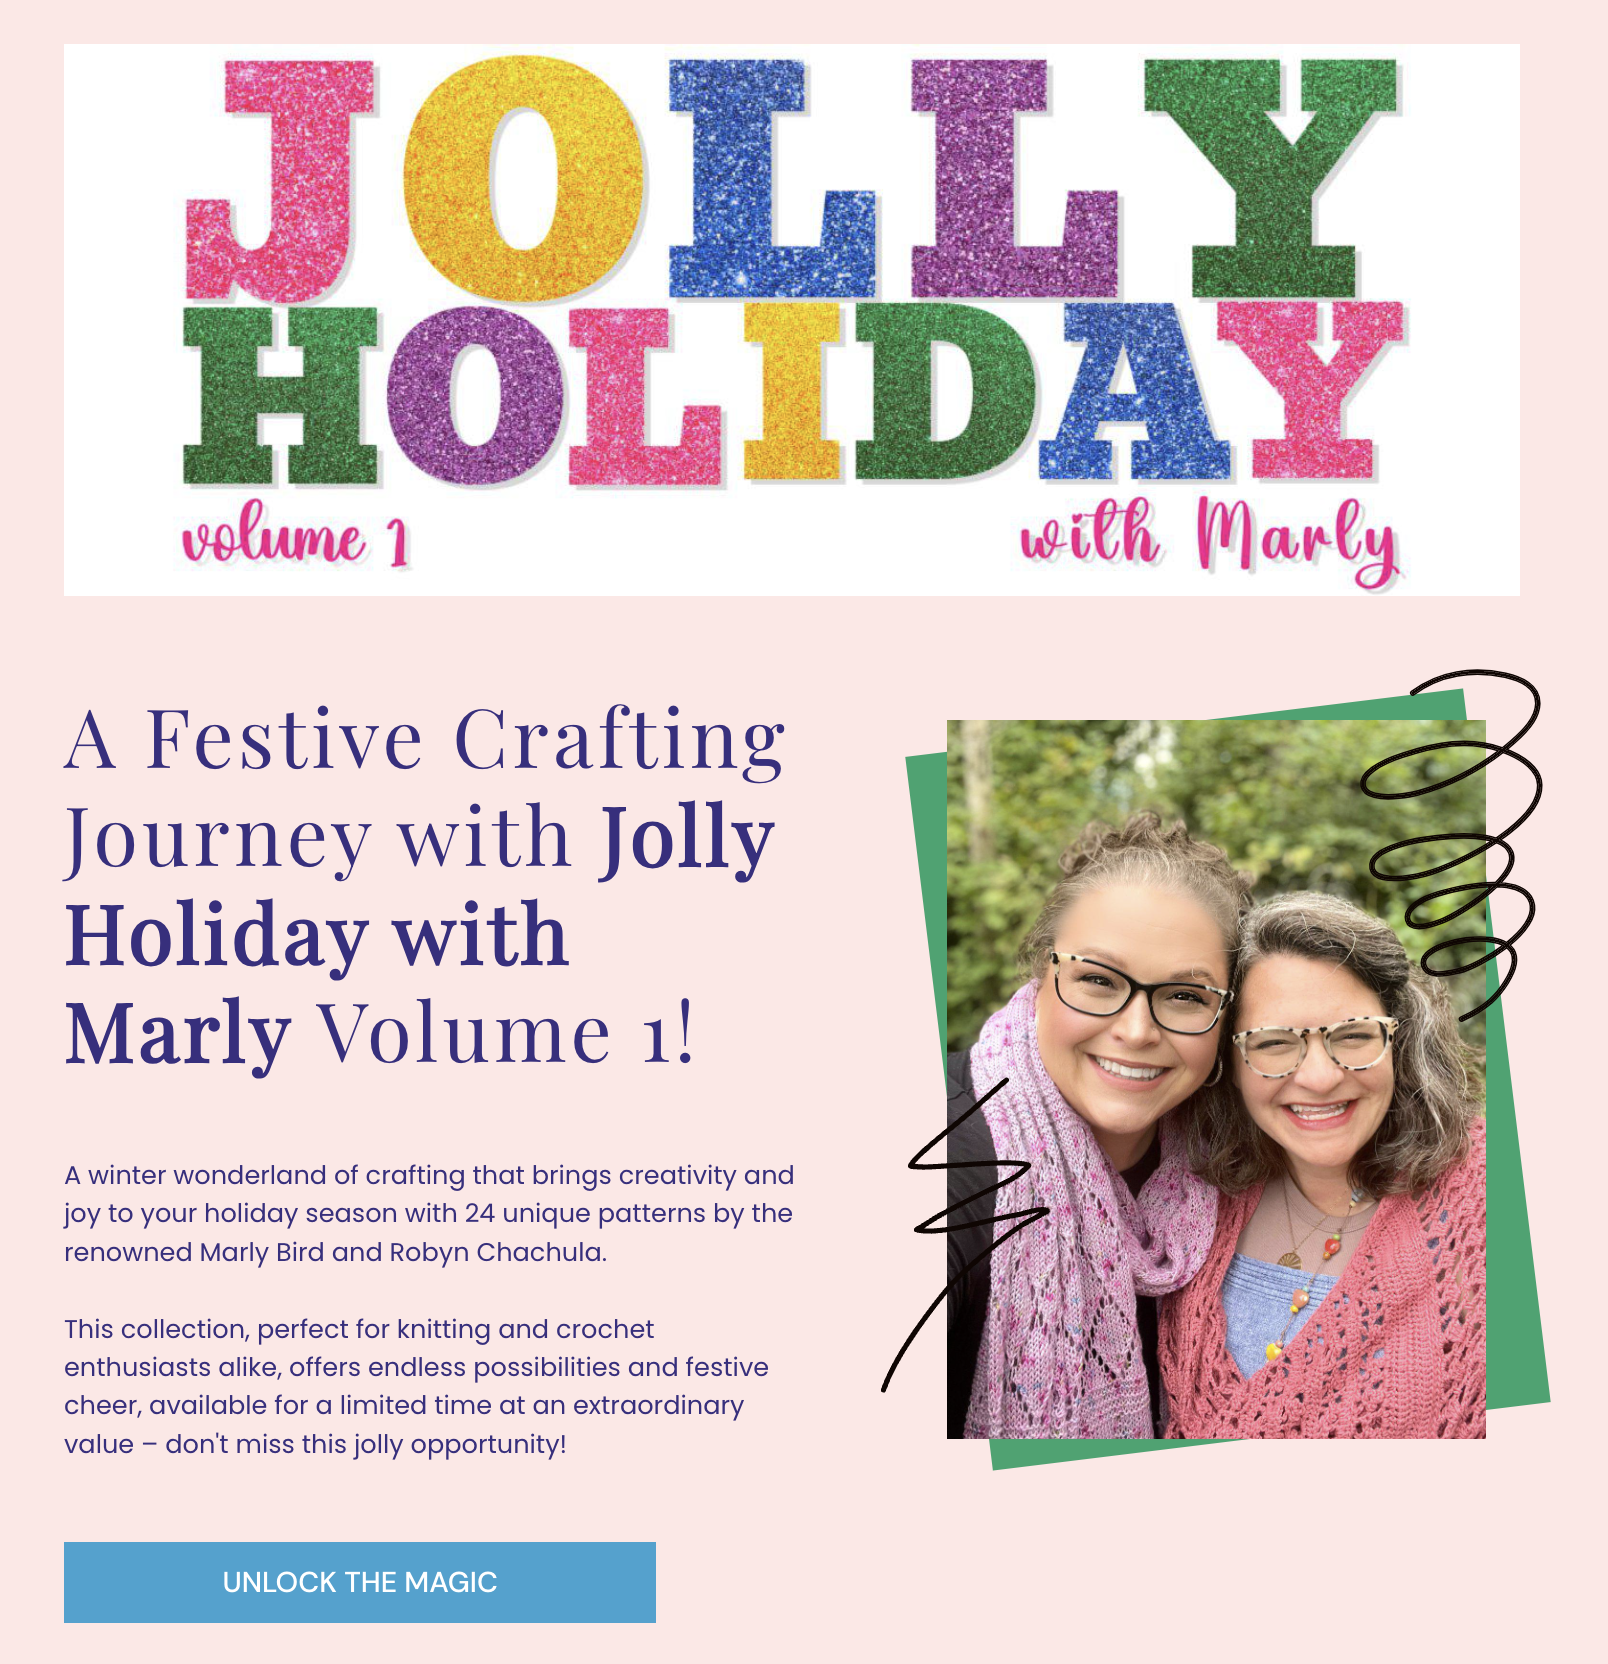 Promotional graphic for 'Jolly Holiday with Marly Volume 1' featuring colorful, glitter-textured lettering of 'Jolly Holiday with Marly' at the top. Below is a subtitle 'A Festive Crafting Journey with Jolly Holiday with Marly Volume 1!' with a photo of Marly Bird and Robyn Chachula smiling, both wearing knitted pink garments. The description text highlights a winter crafting collection of 24 patterns with an 'Unlock the Magic' button at the bottom.
Crochet and knitting gifts